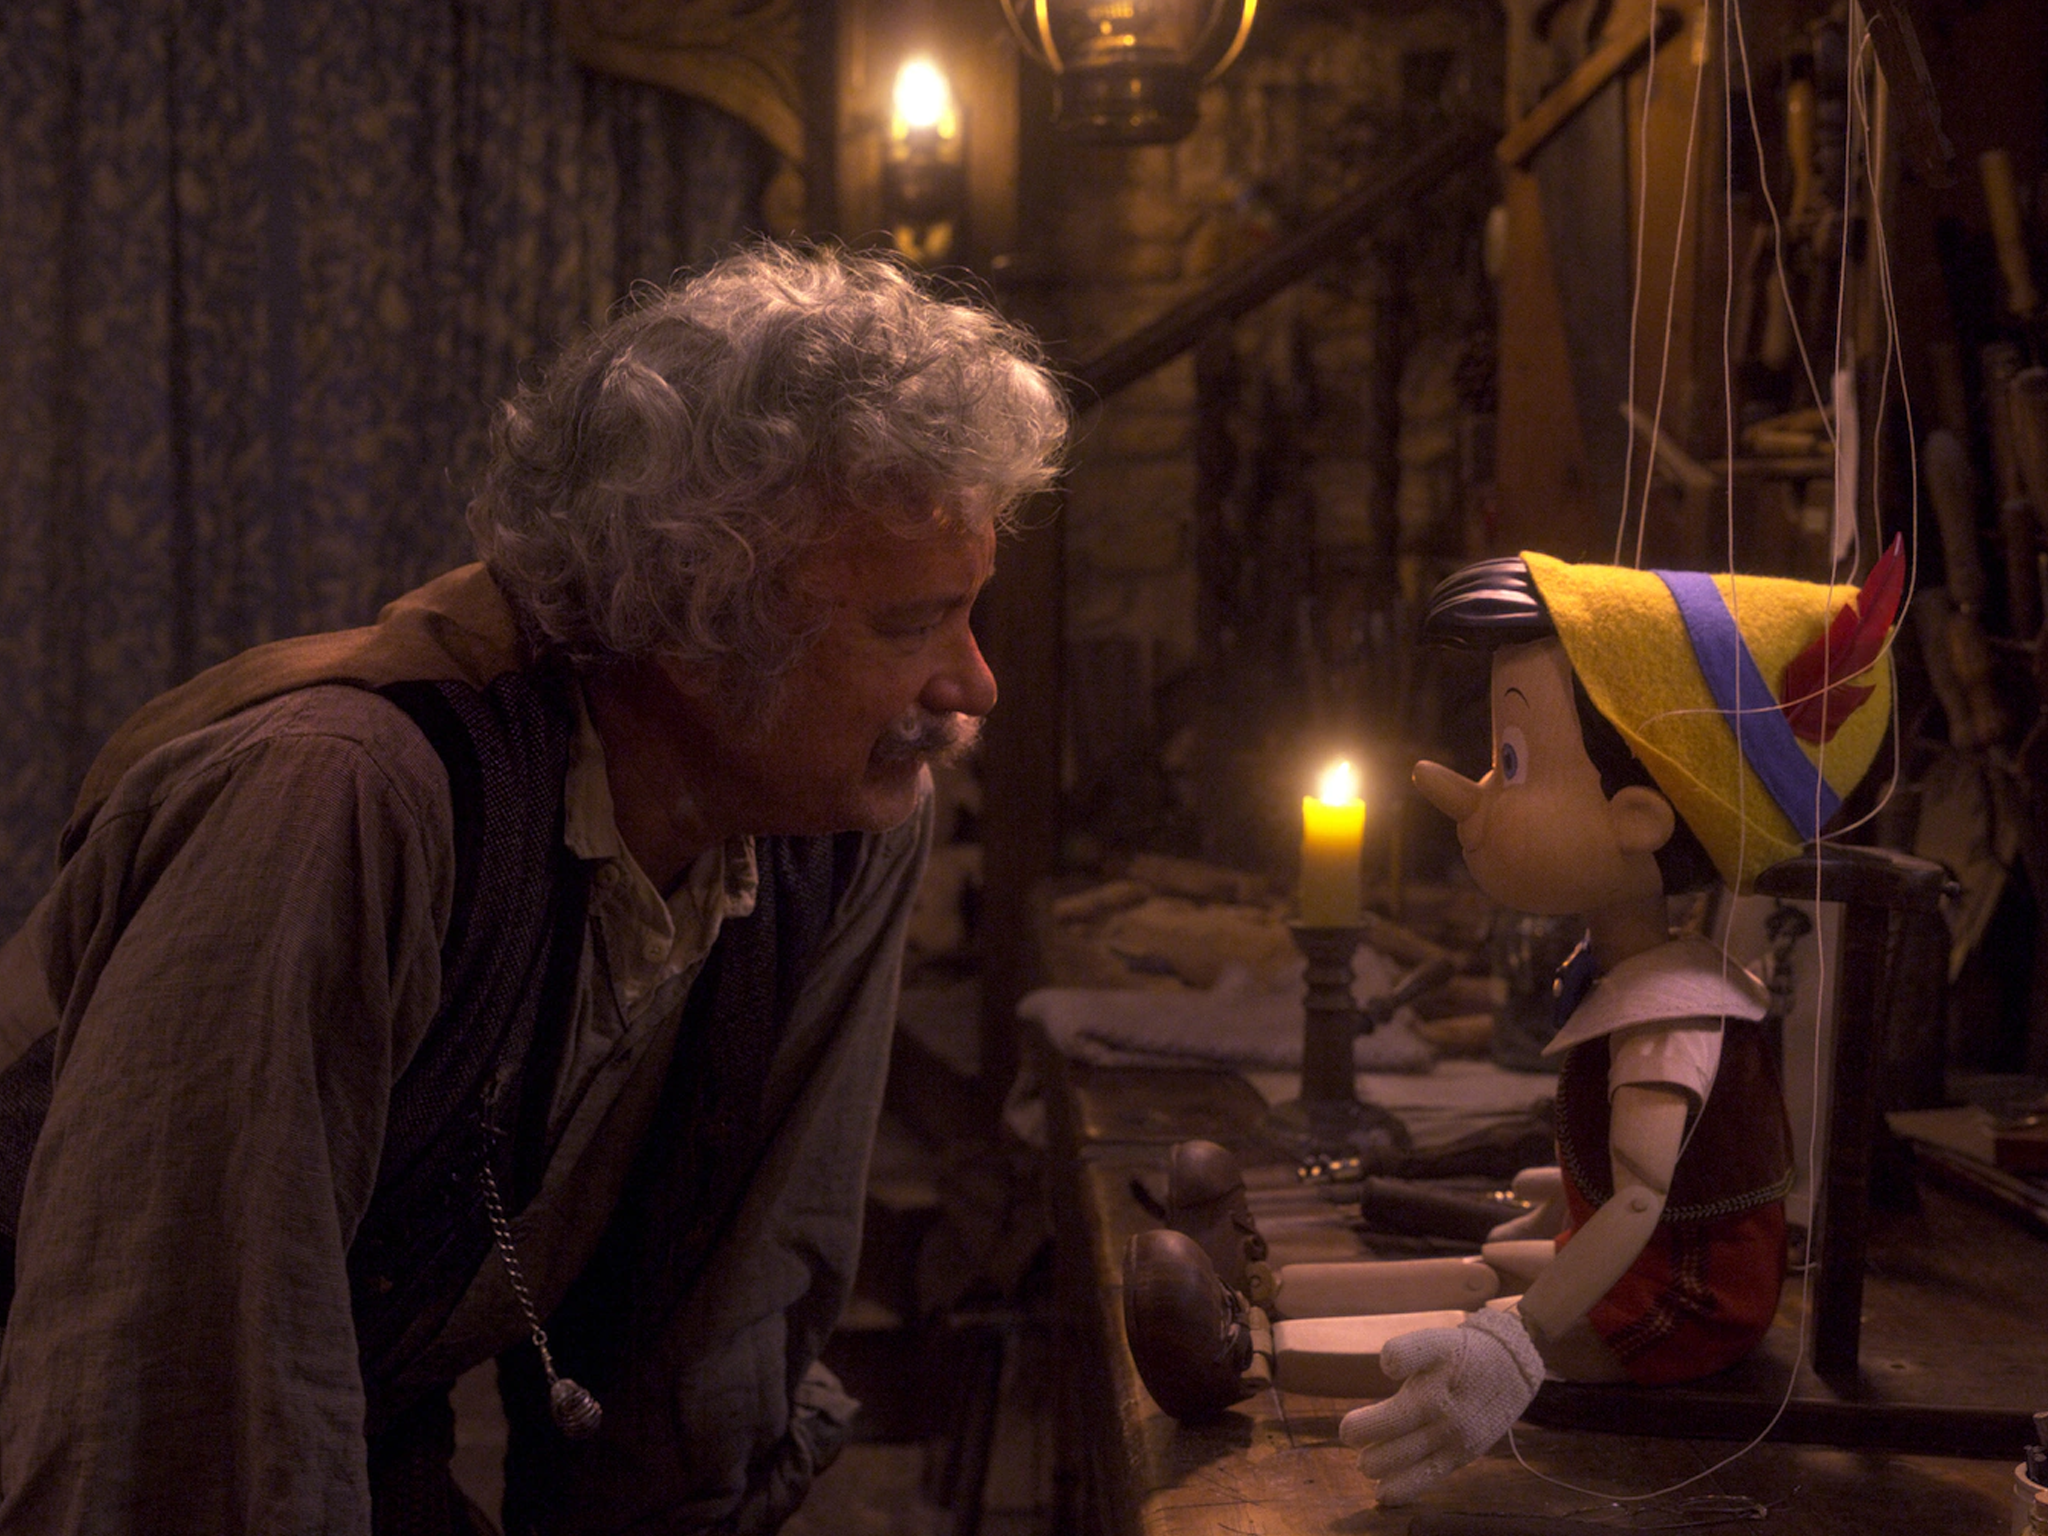 Tom Hanks as Geppetto in Pinocchio